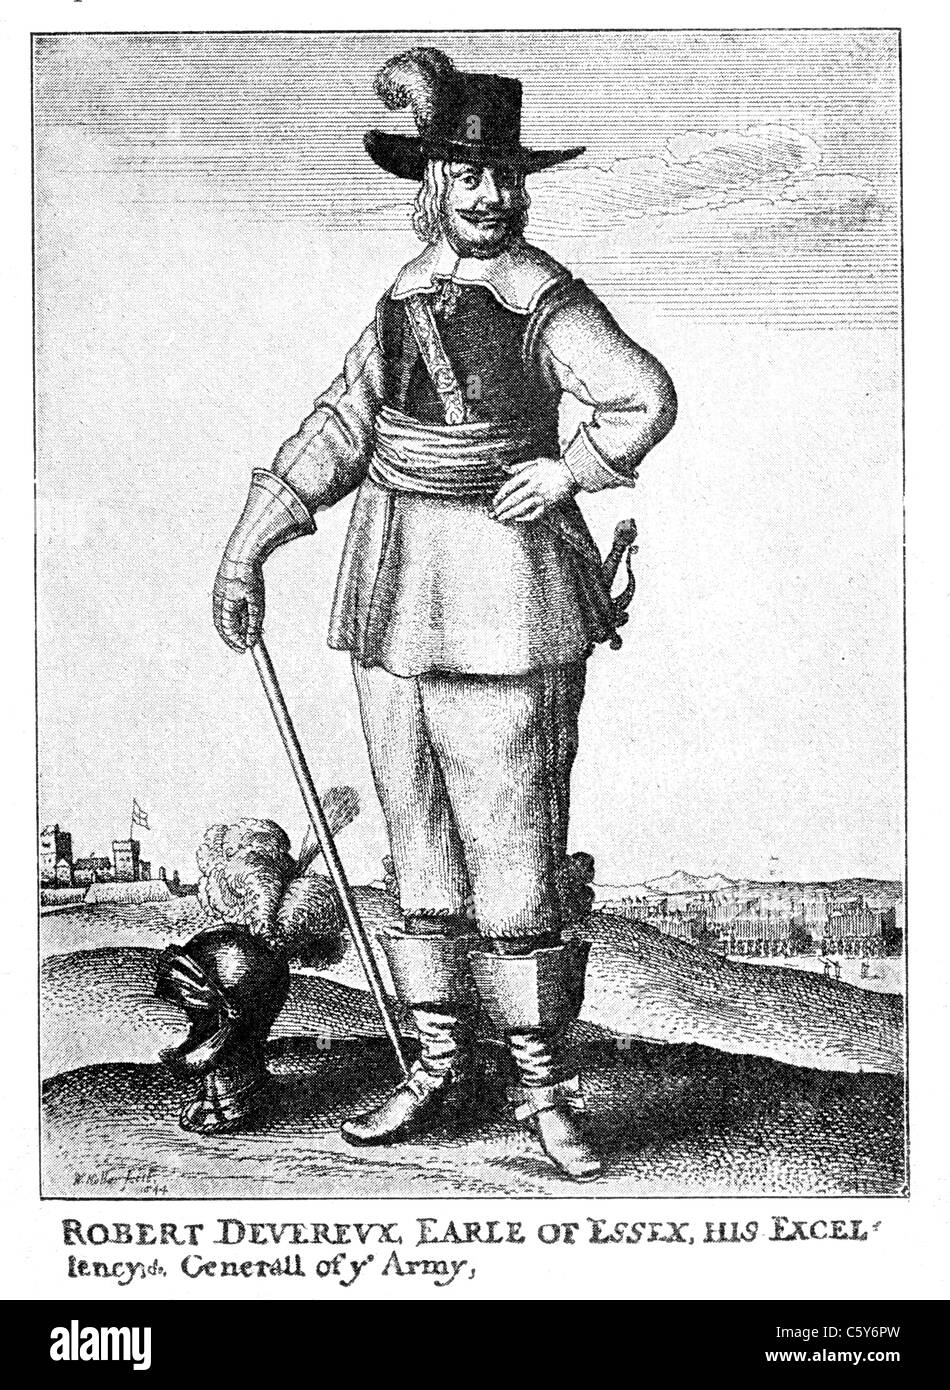 Robert Devreux, 3rd Earl of Essex, English Parliamentarian General during the English Civil War; Black and White Illustration; Stock Photo